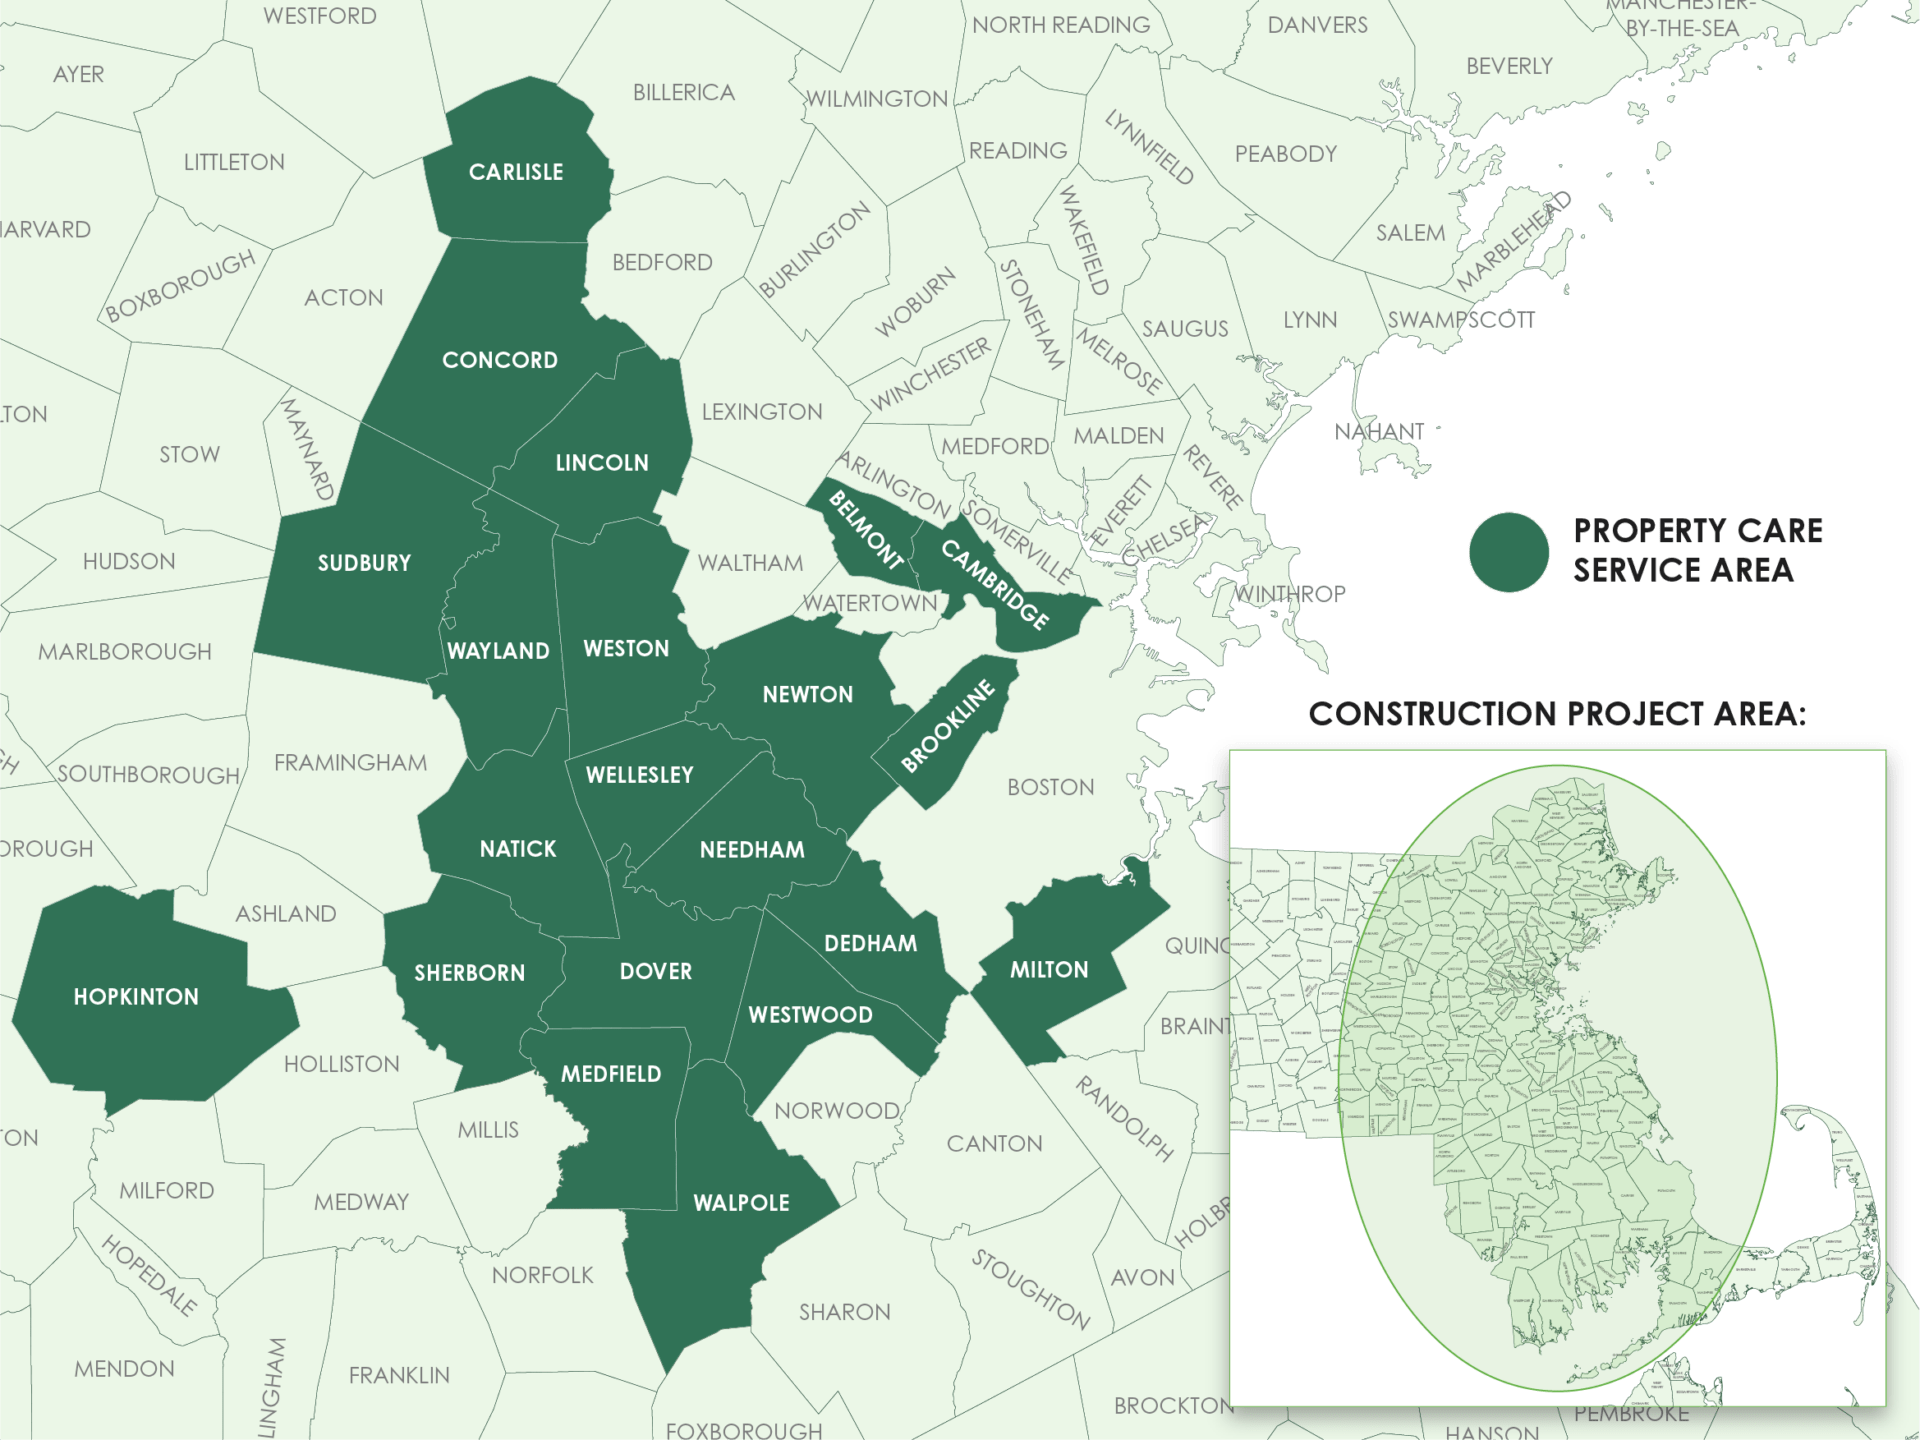 The image displays a map depicting two distinct service areas around Boston: one for property care, the other for construction projects, with city names labeled.